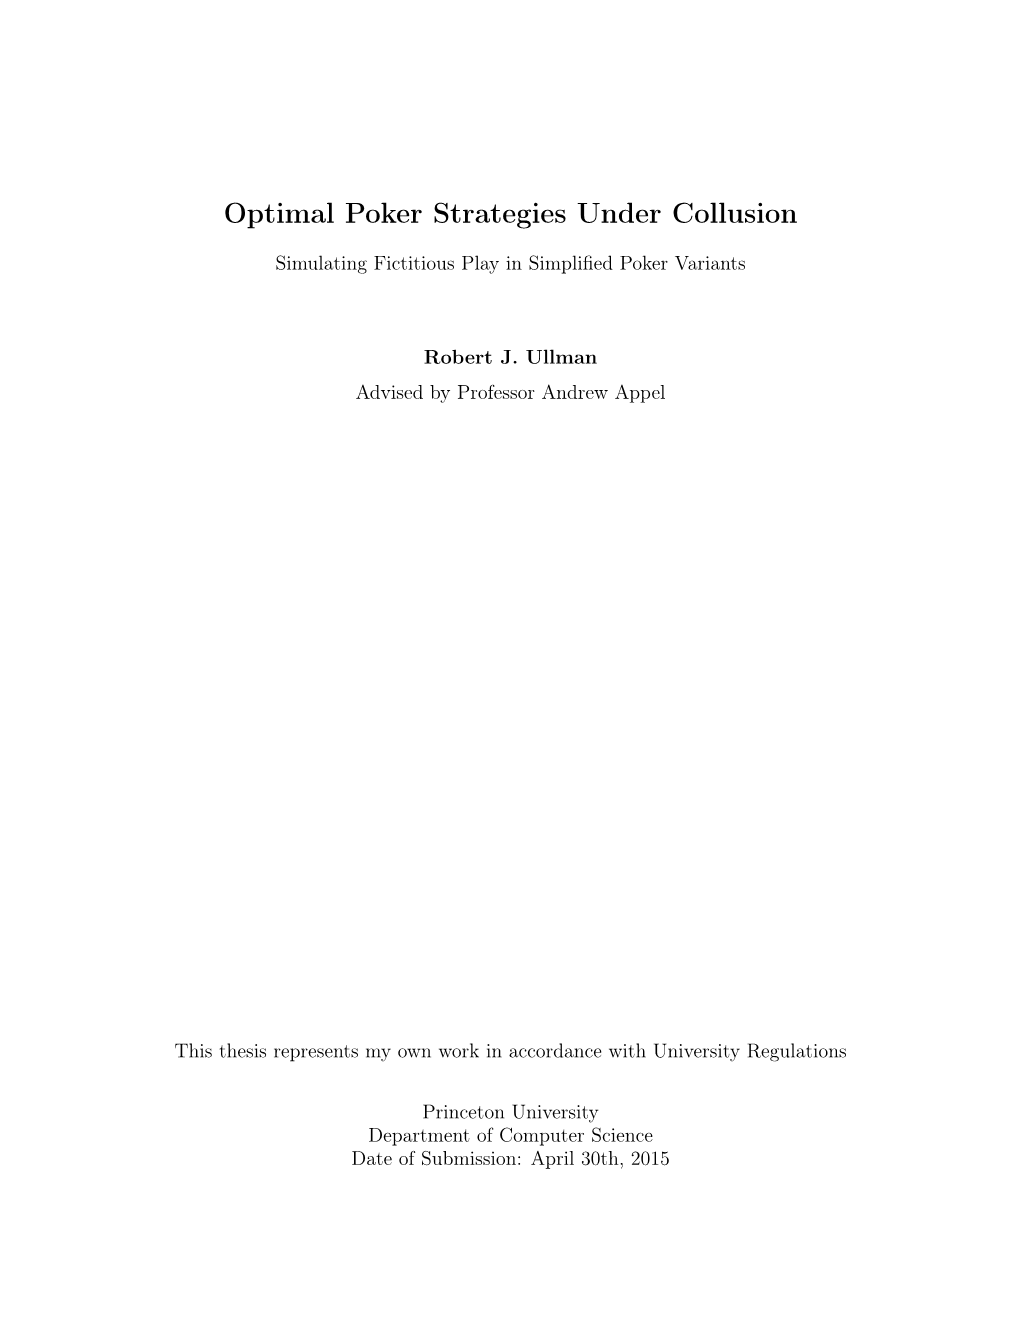 Optimal Poker Strategies Under Collusion: Simulating Fictitious Play in Simplified Poker Variants